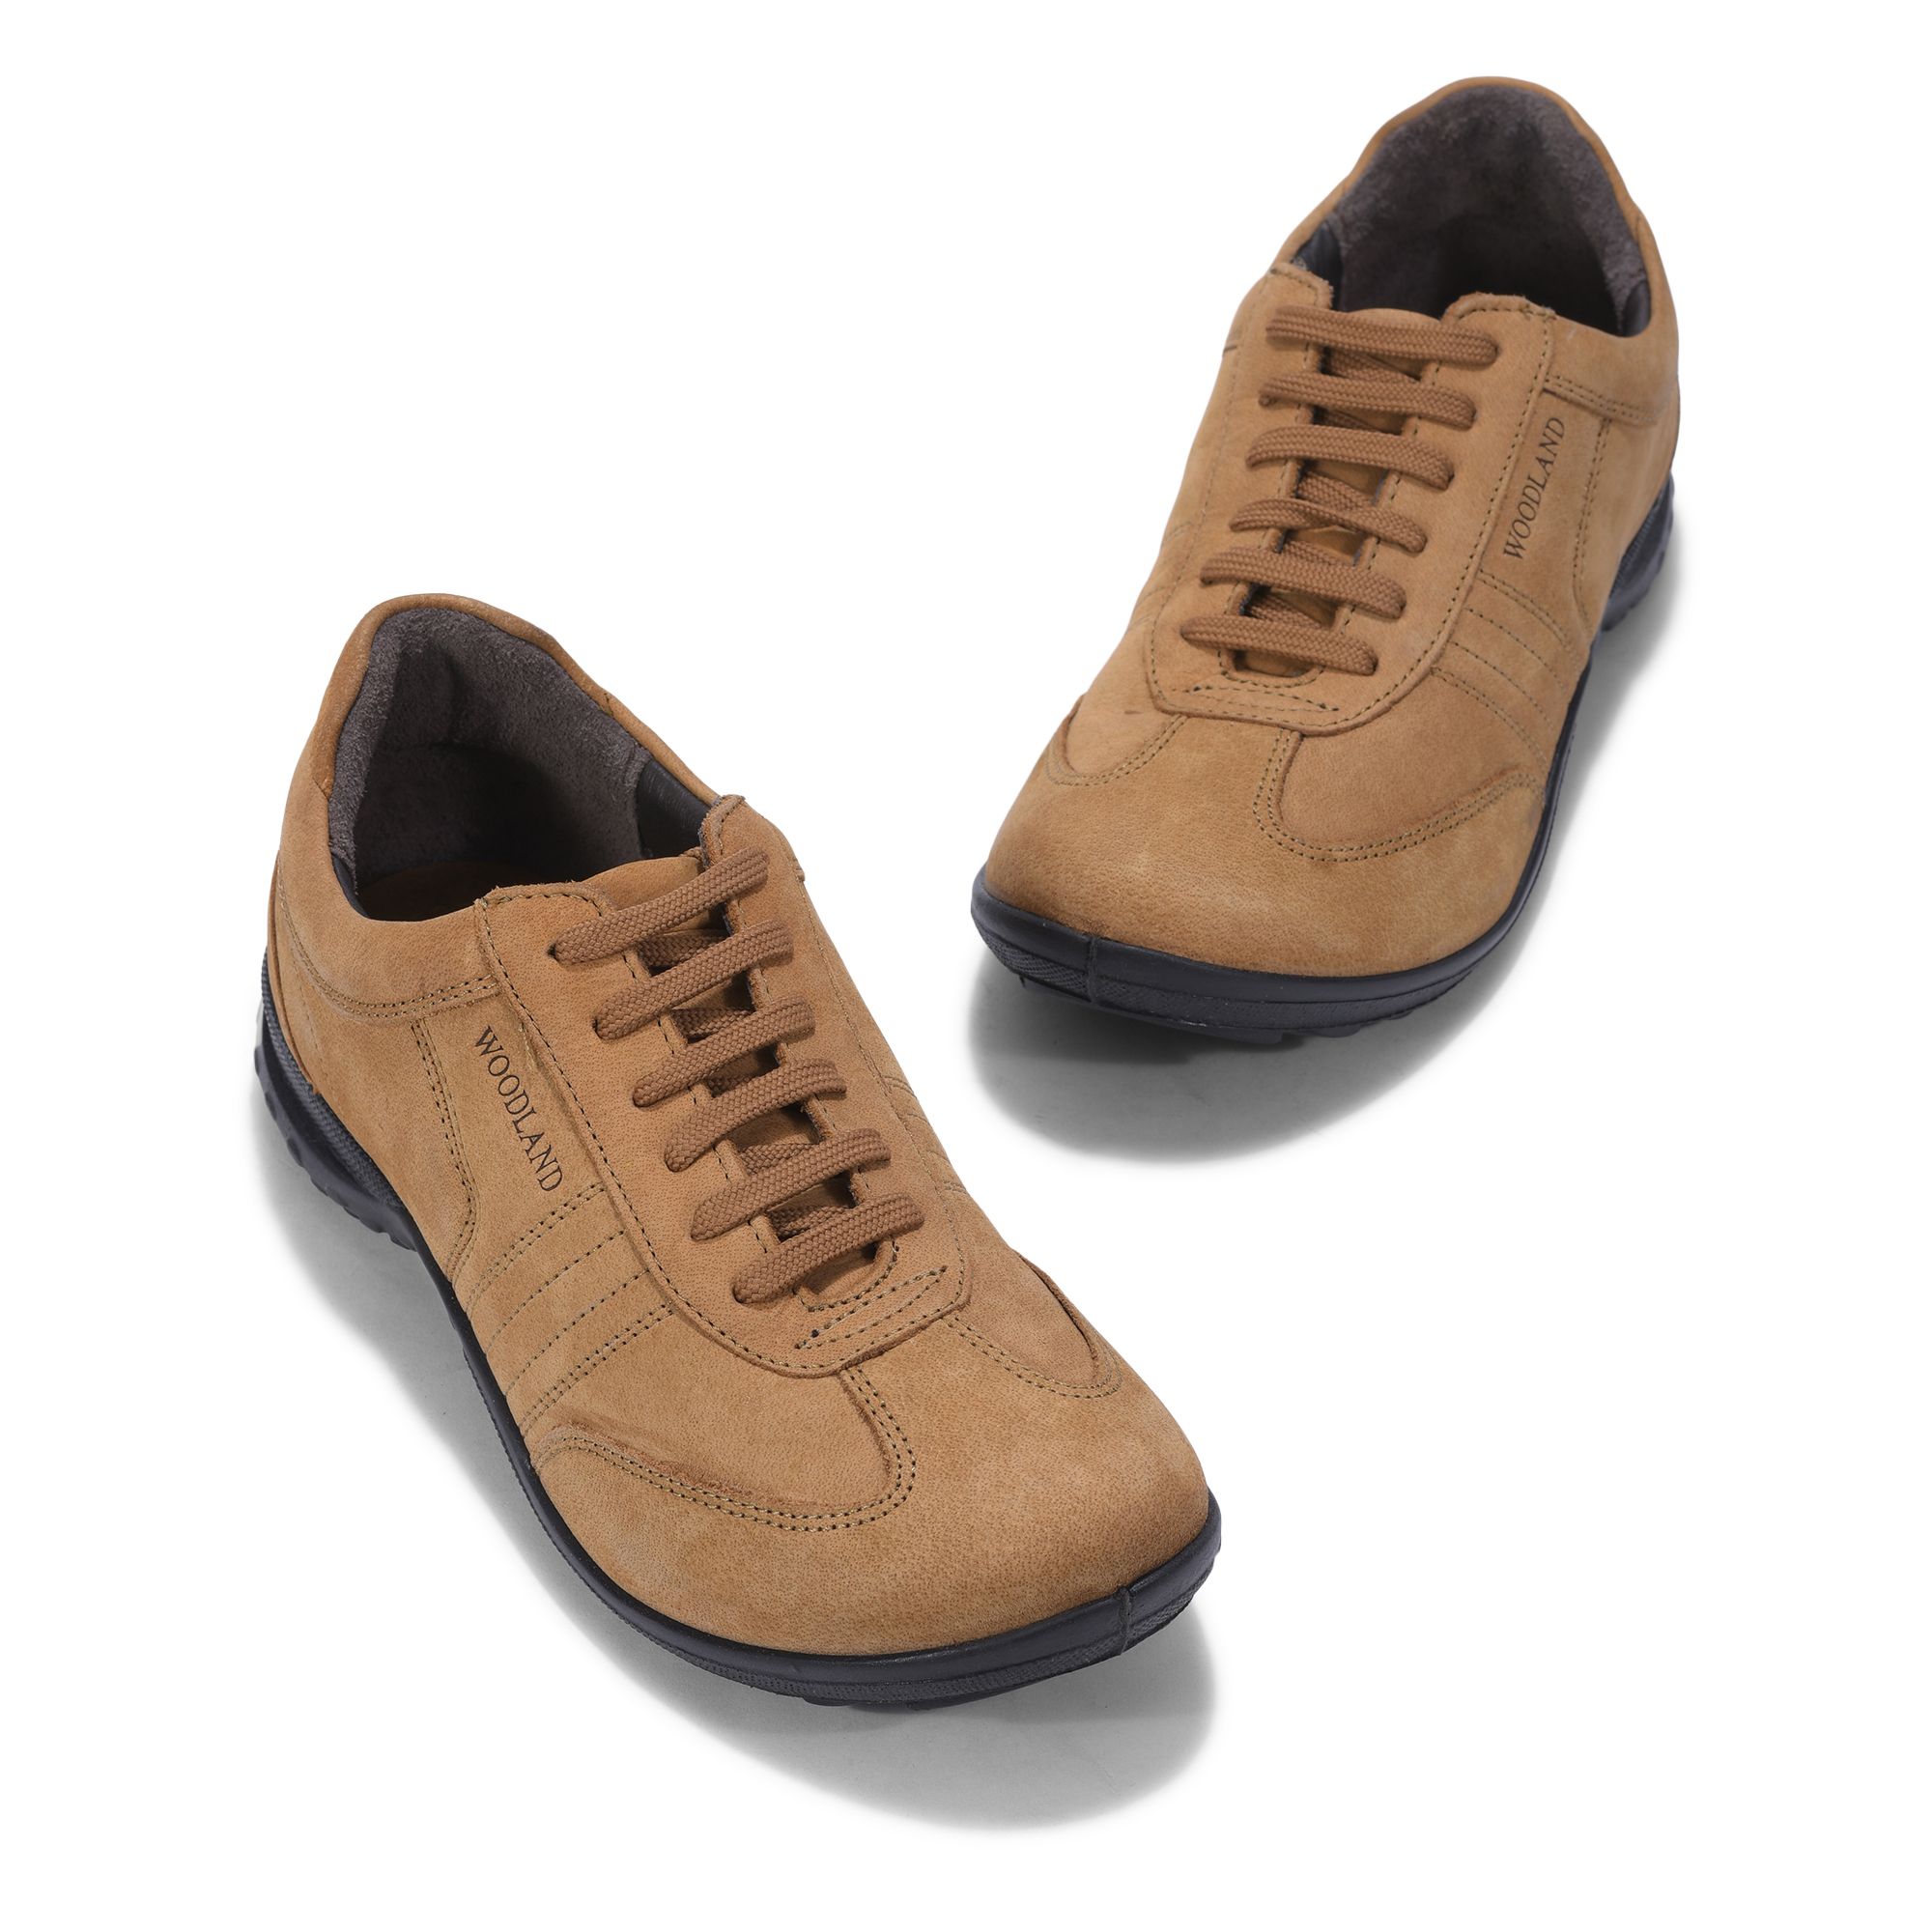 Woodland Camel Casual Shoes for Men